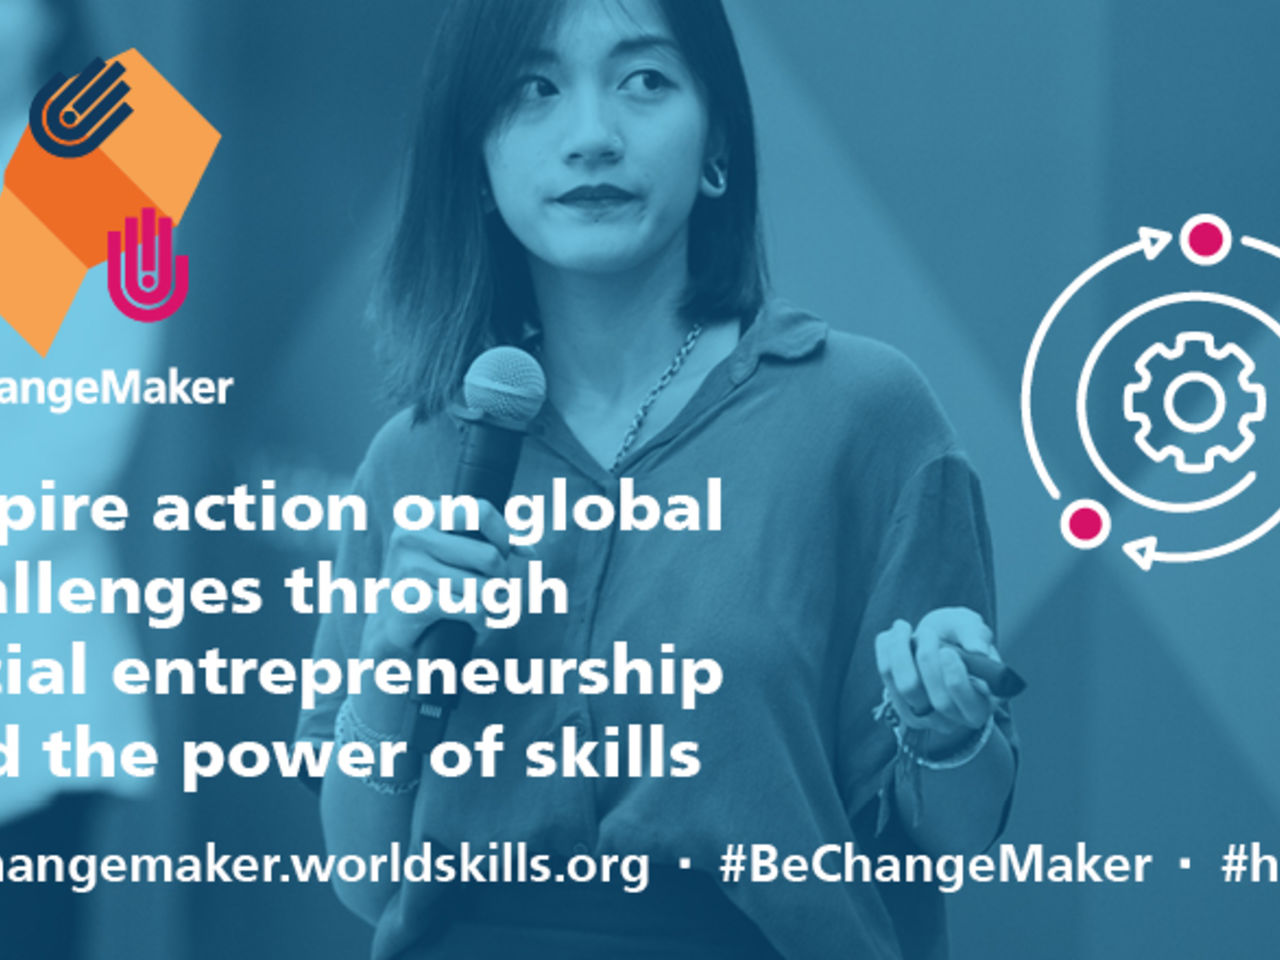 Become a global citizen. Become a change maker.